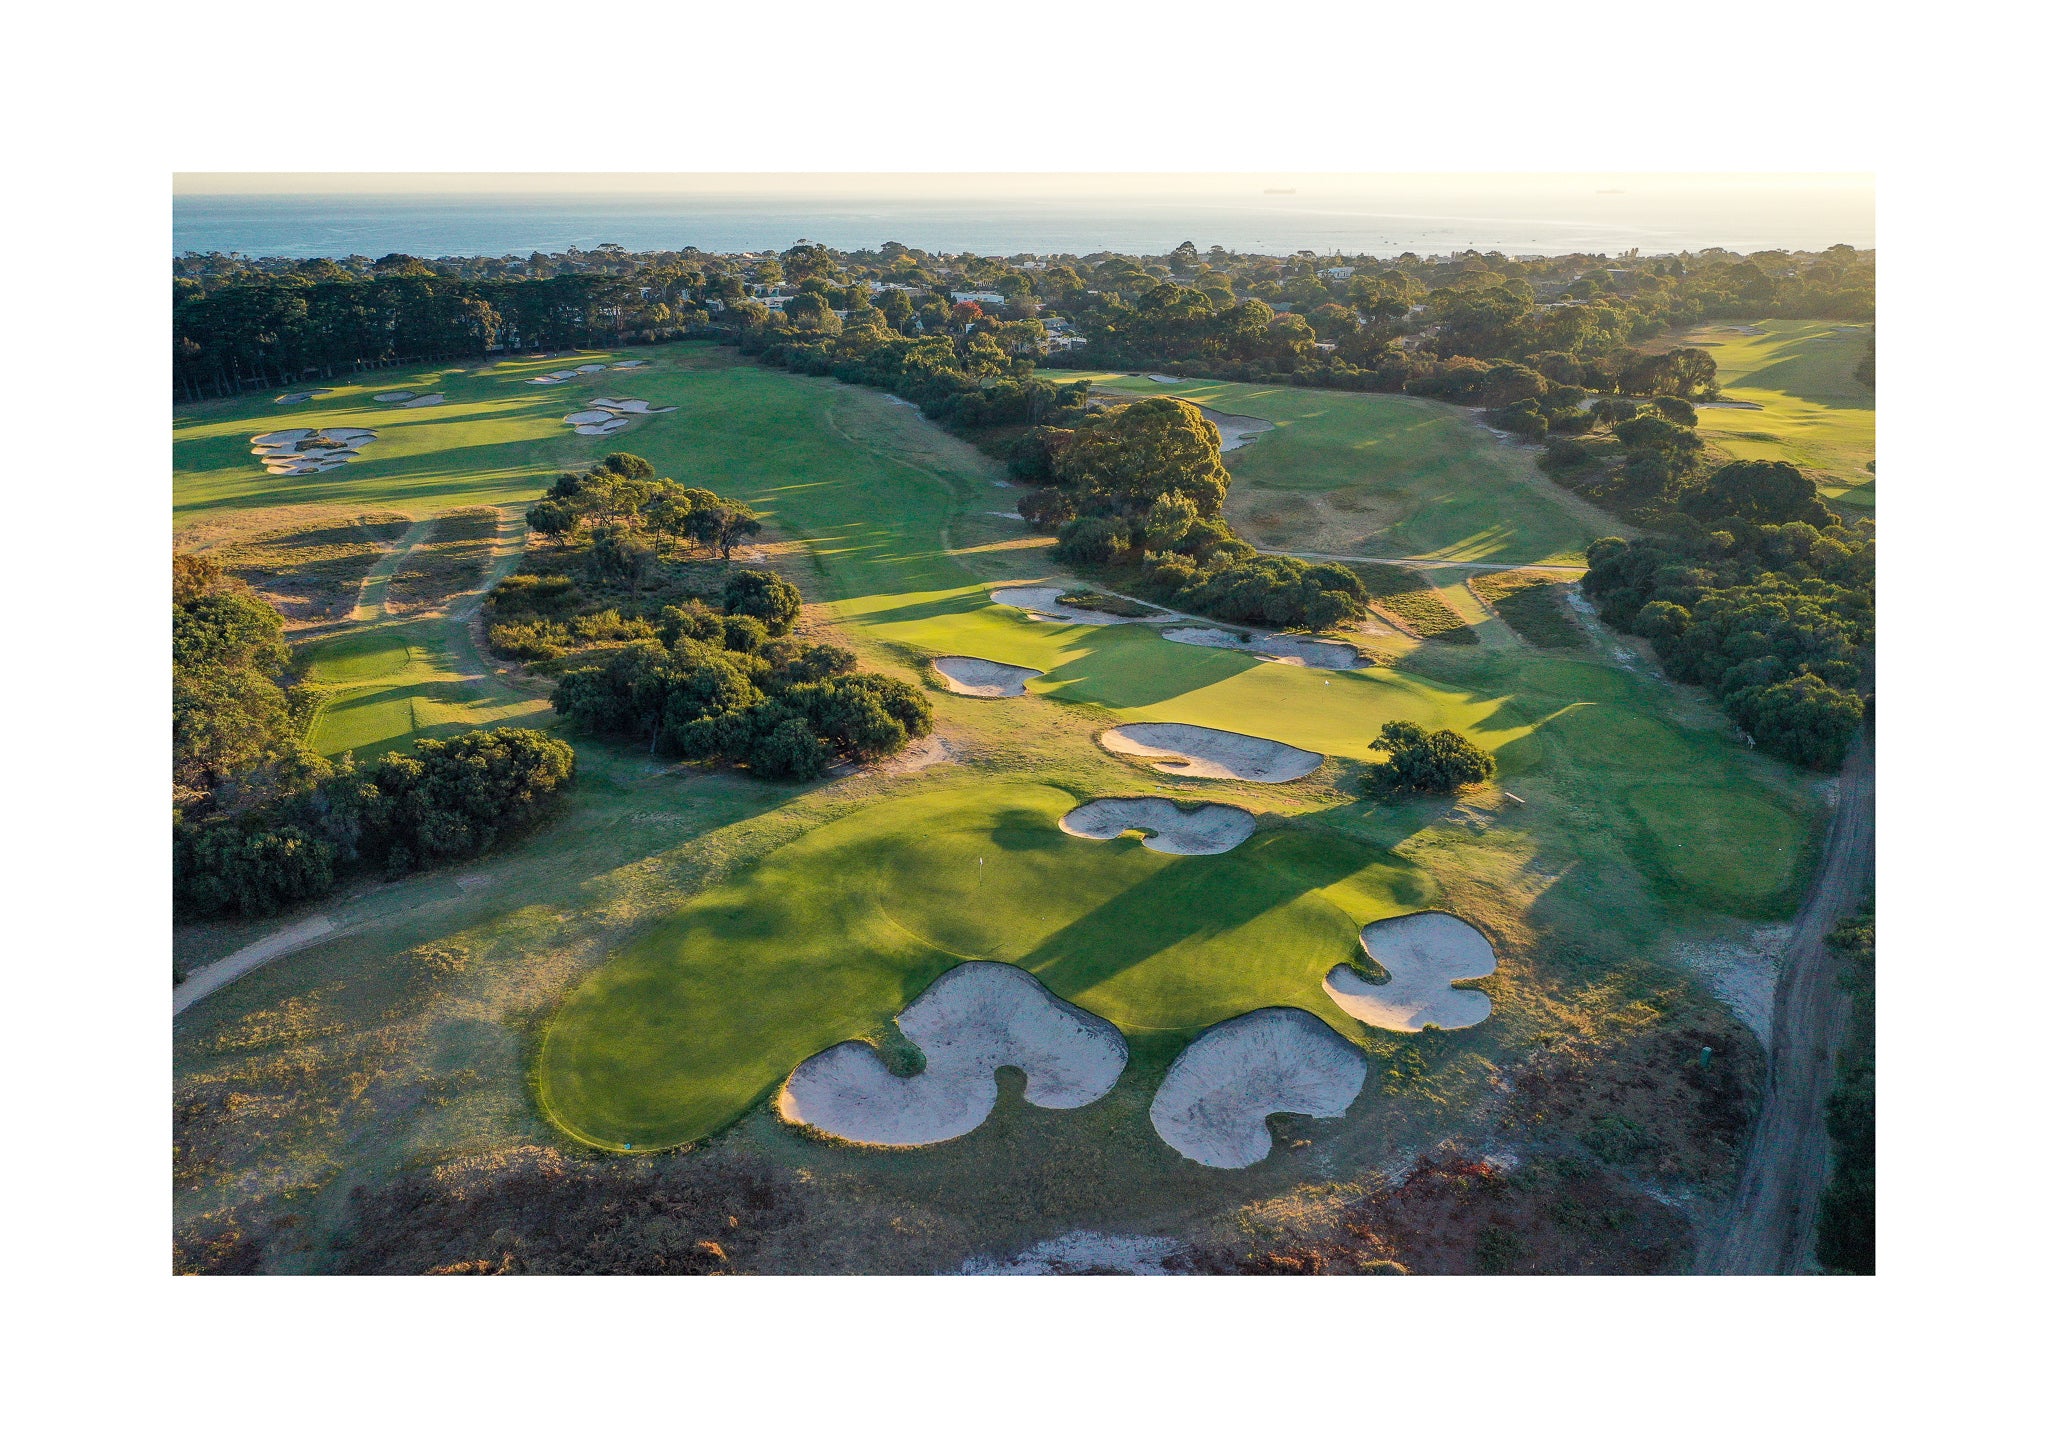 West Course Turn at Royal Melbourne